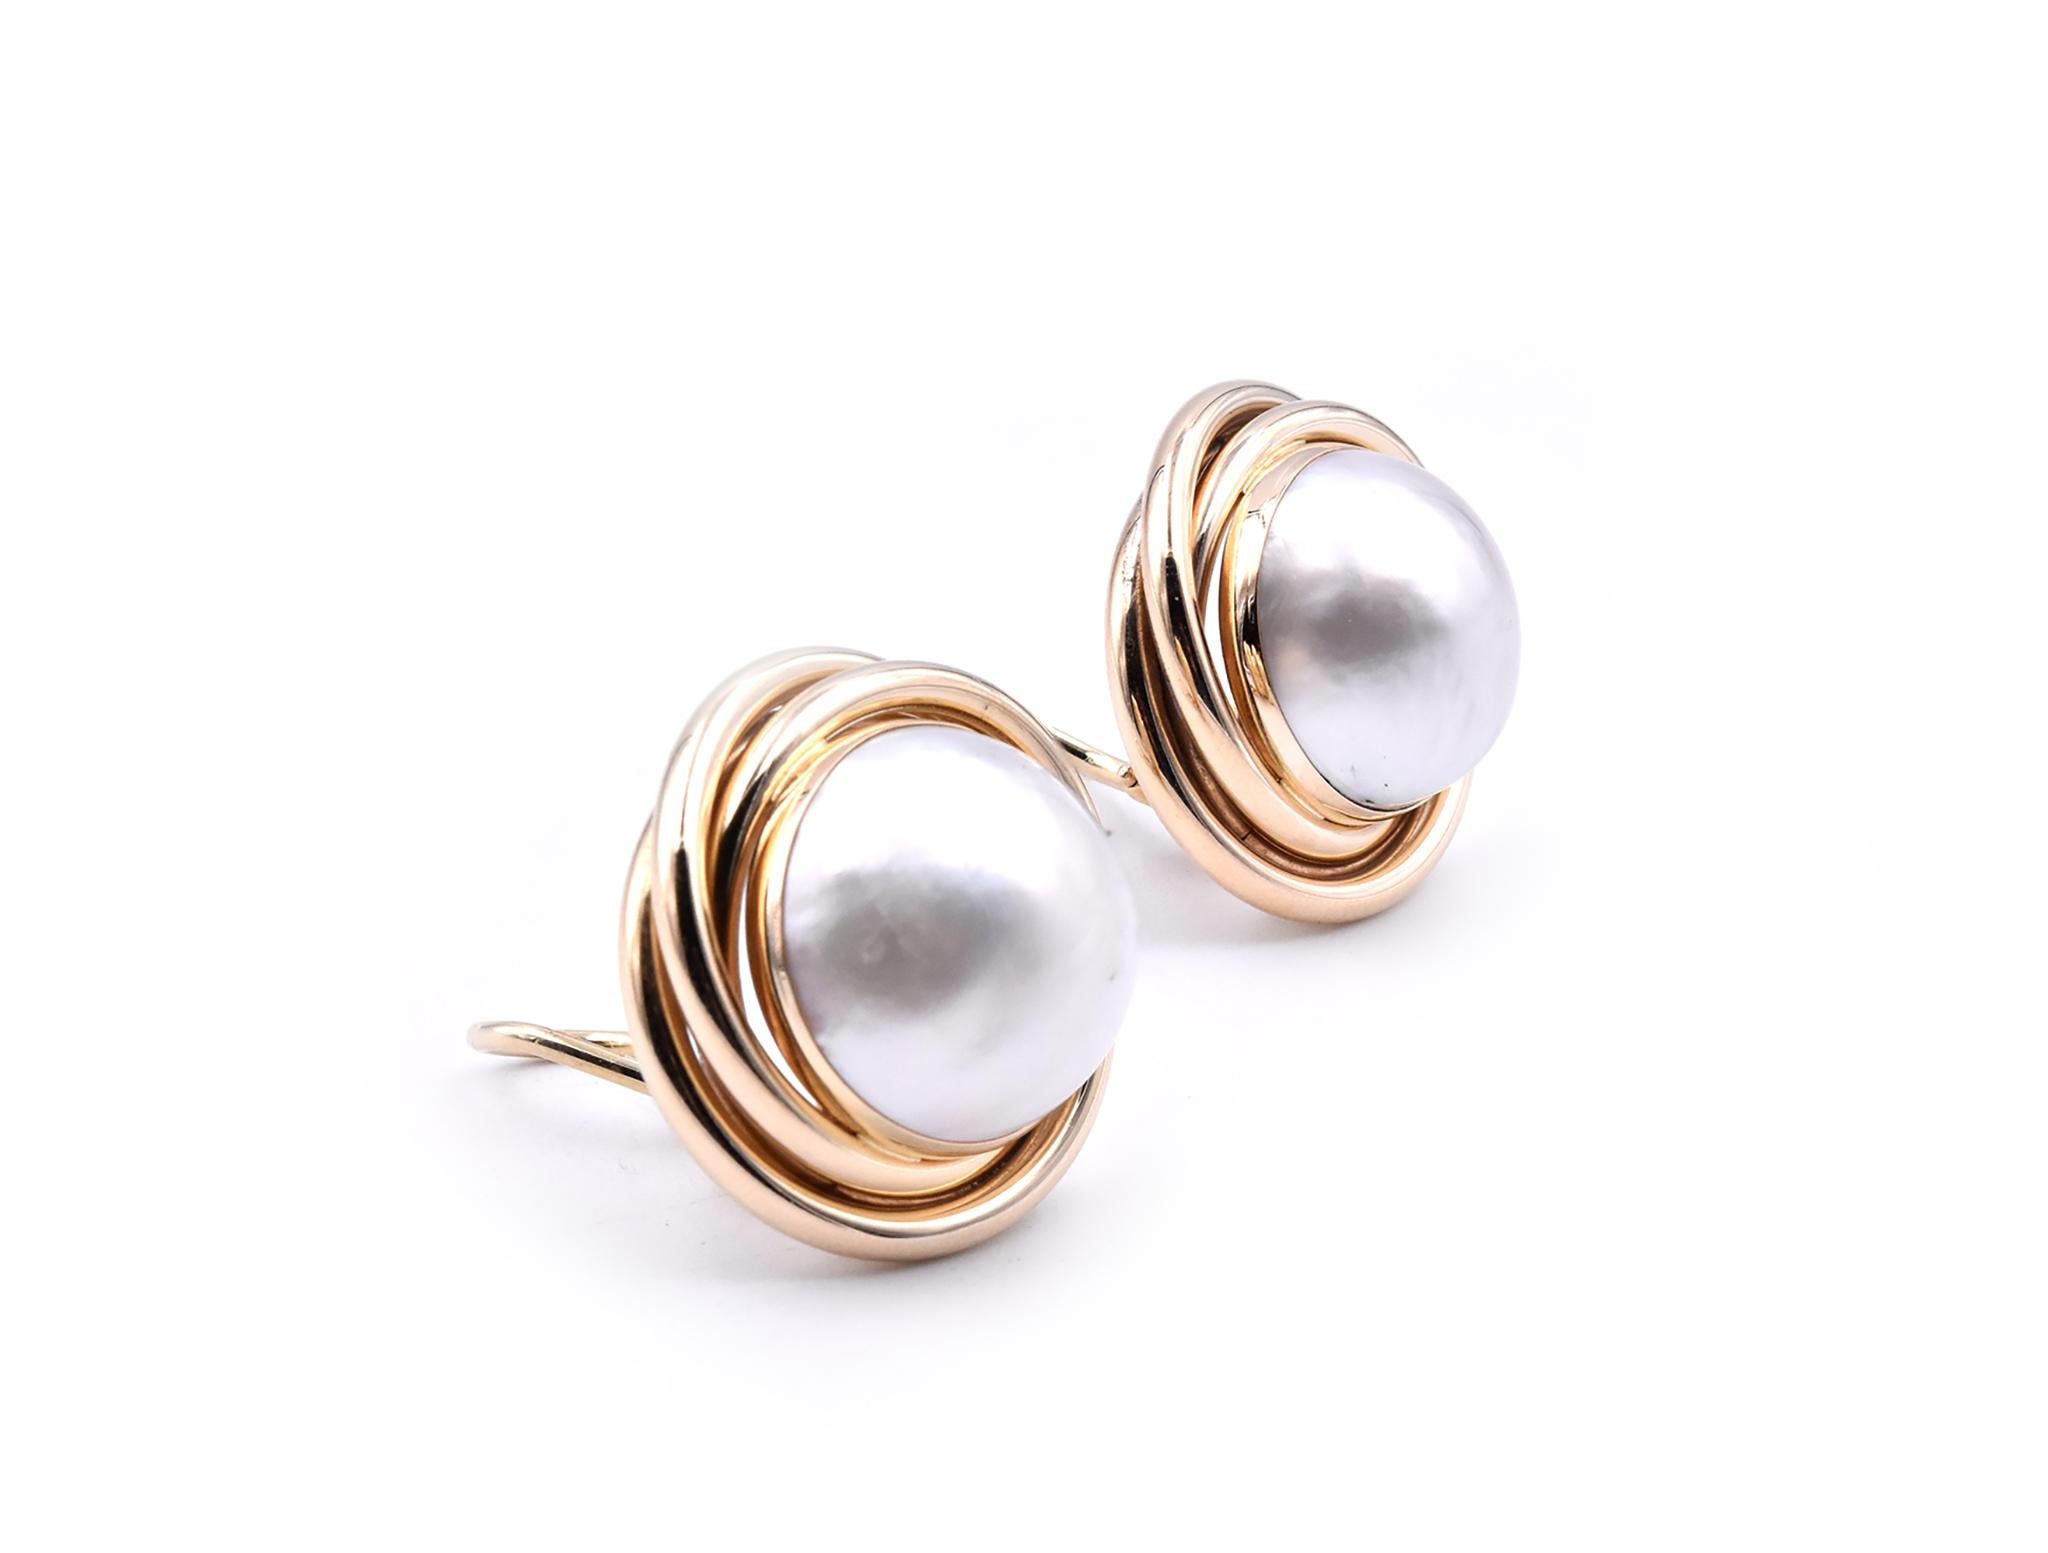 Designer: custom designed
Material: 14K yellow gold
Pearls: 2 = 16.5mm mabe 
Fastenings: non-pierced omega backs
Dimensions: earrings measure 25mm wide
Weight: 15.41 grams
